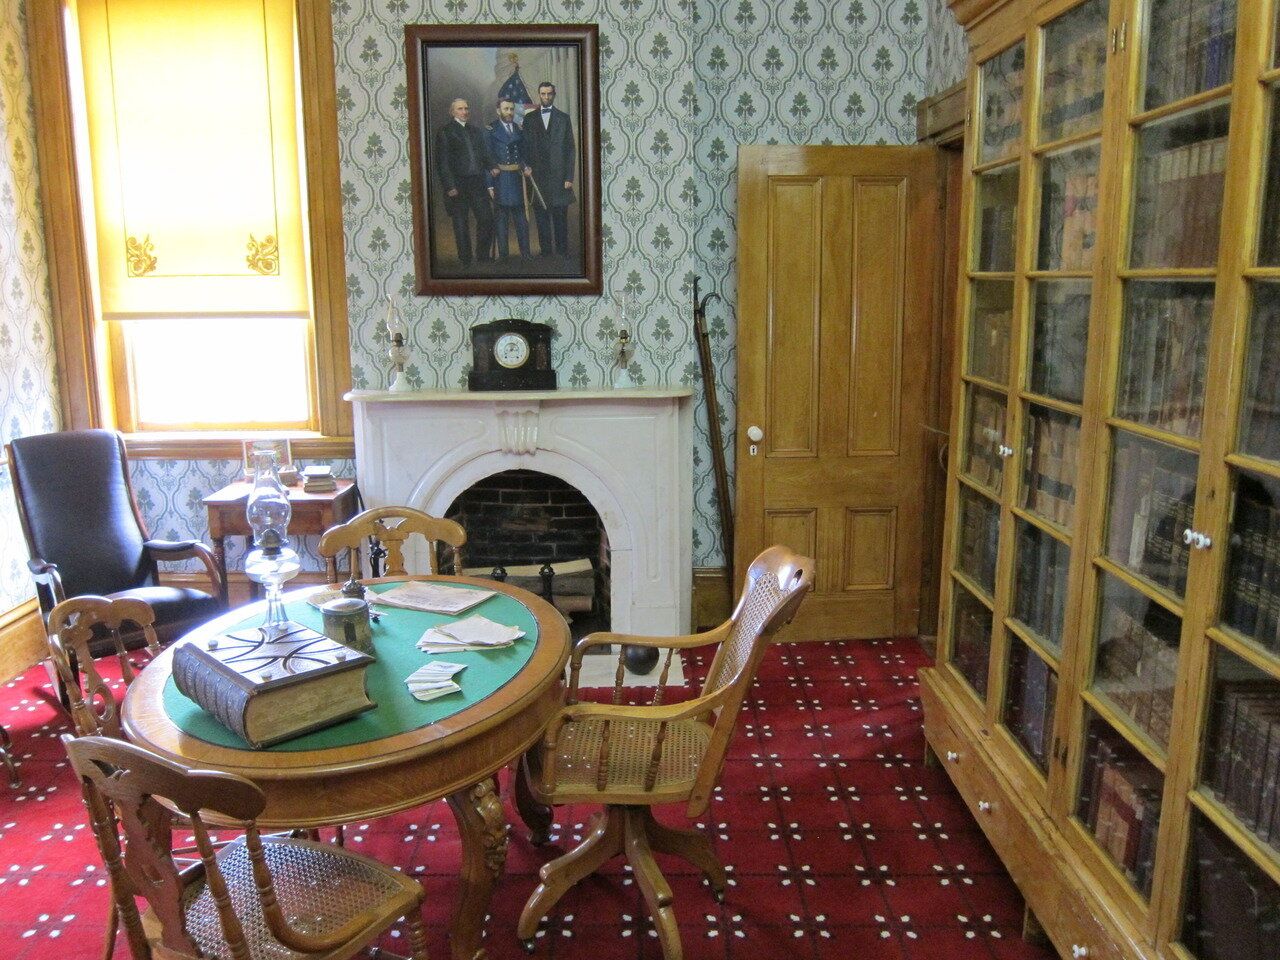 I snapped this during a road trip across Illinois about a month ago. It&#8217;s the workspace of President Ulysses S. Grant in Galena, IL. A rather simple space considering its time and occupant.